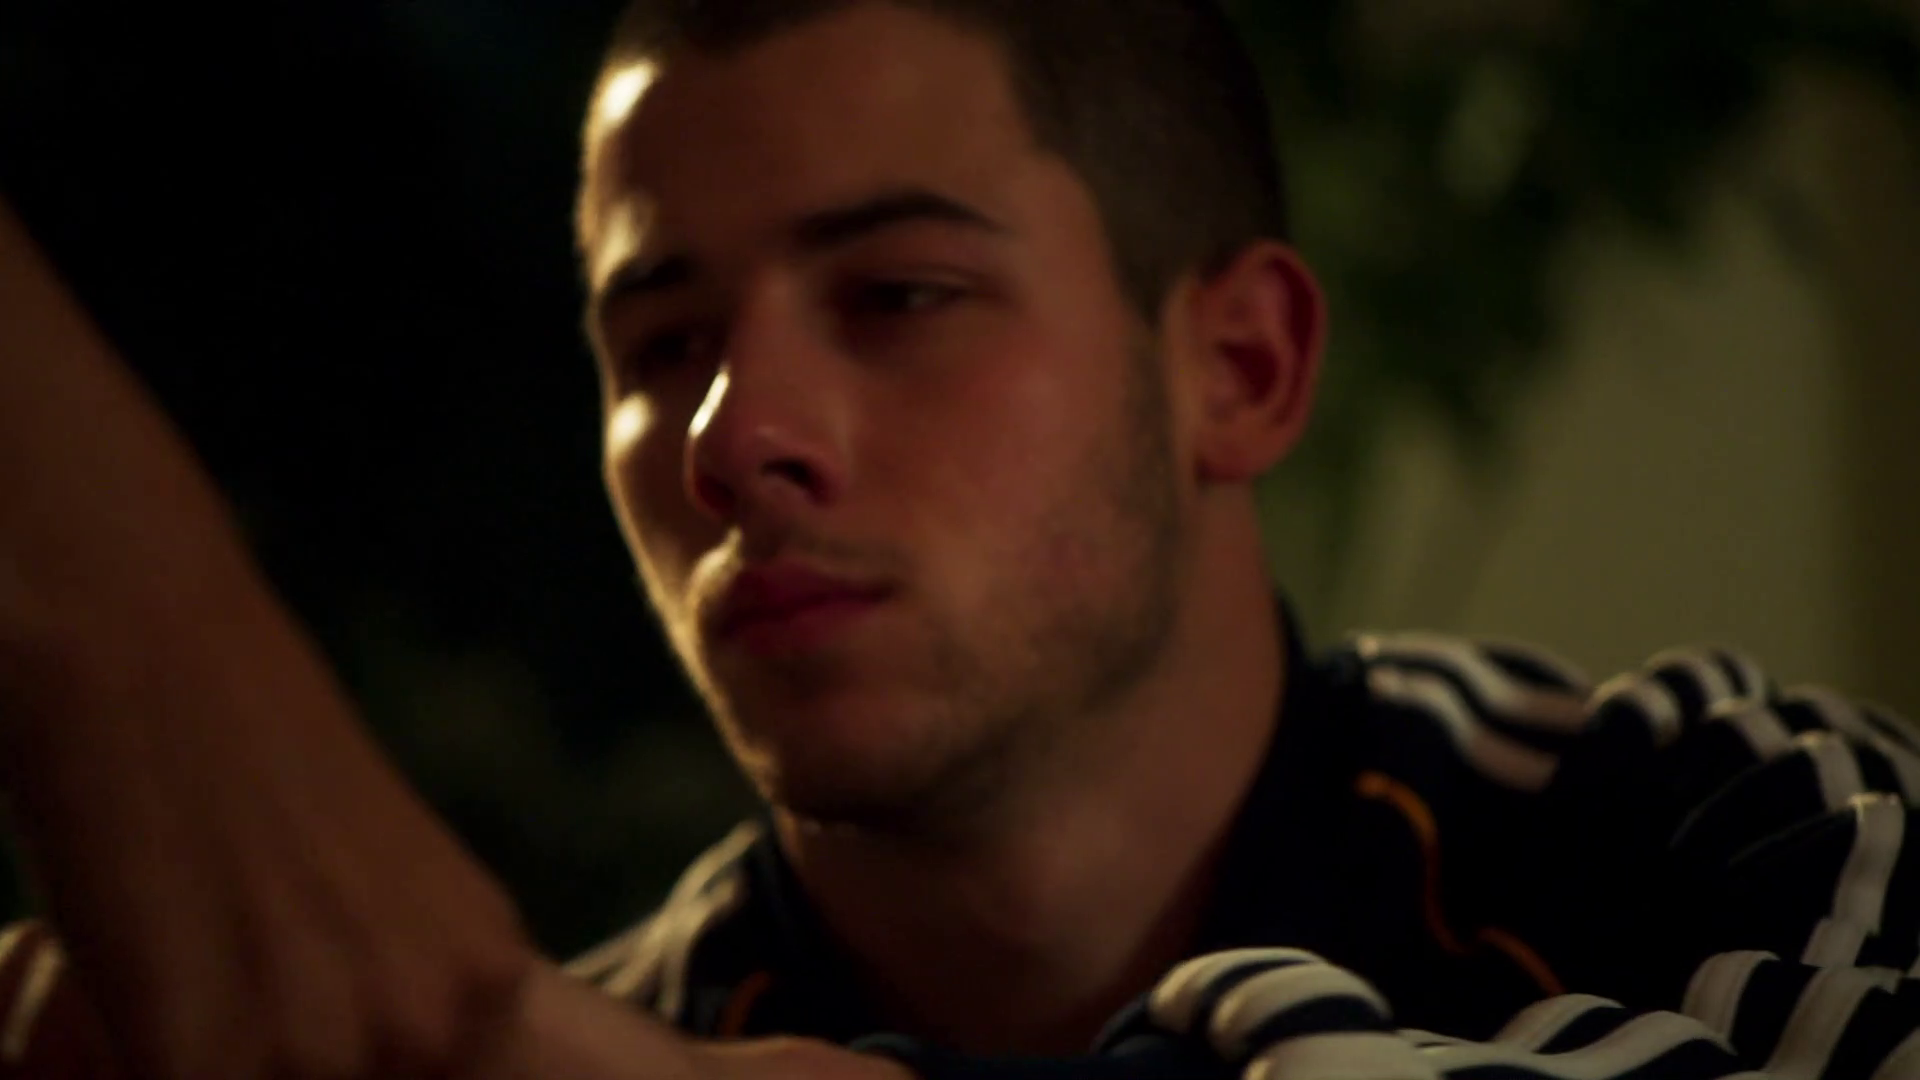 Auscaps Nick Jonas And Jared North Shirtless In Kingdom 2 12 No Fault